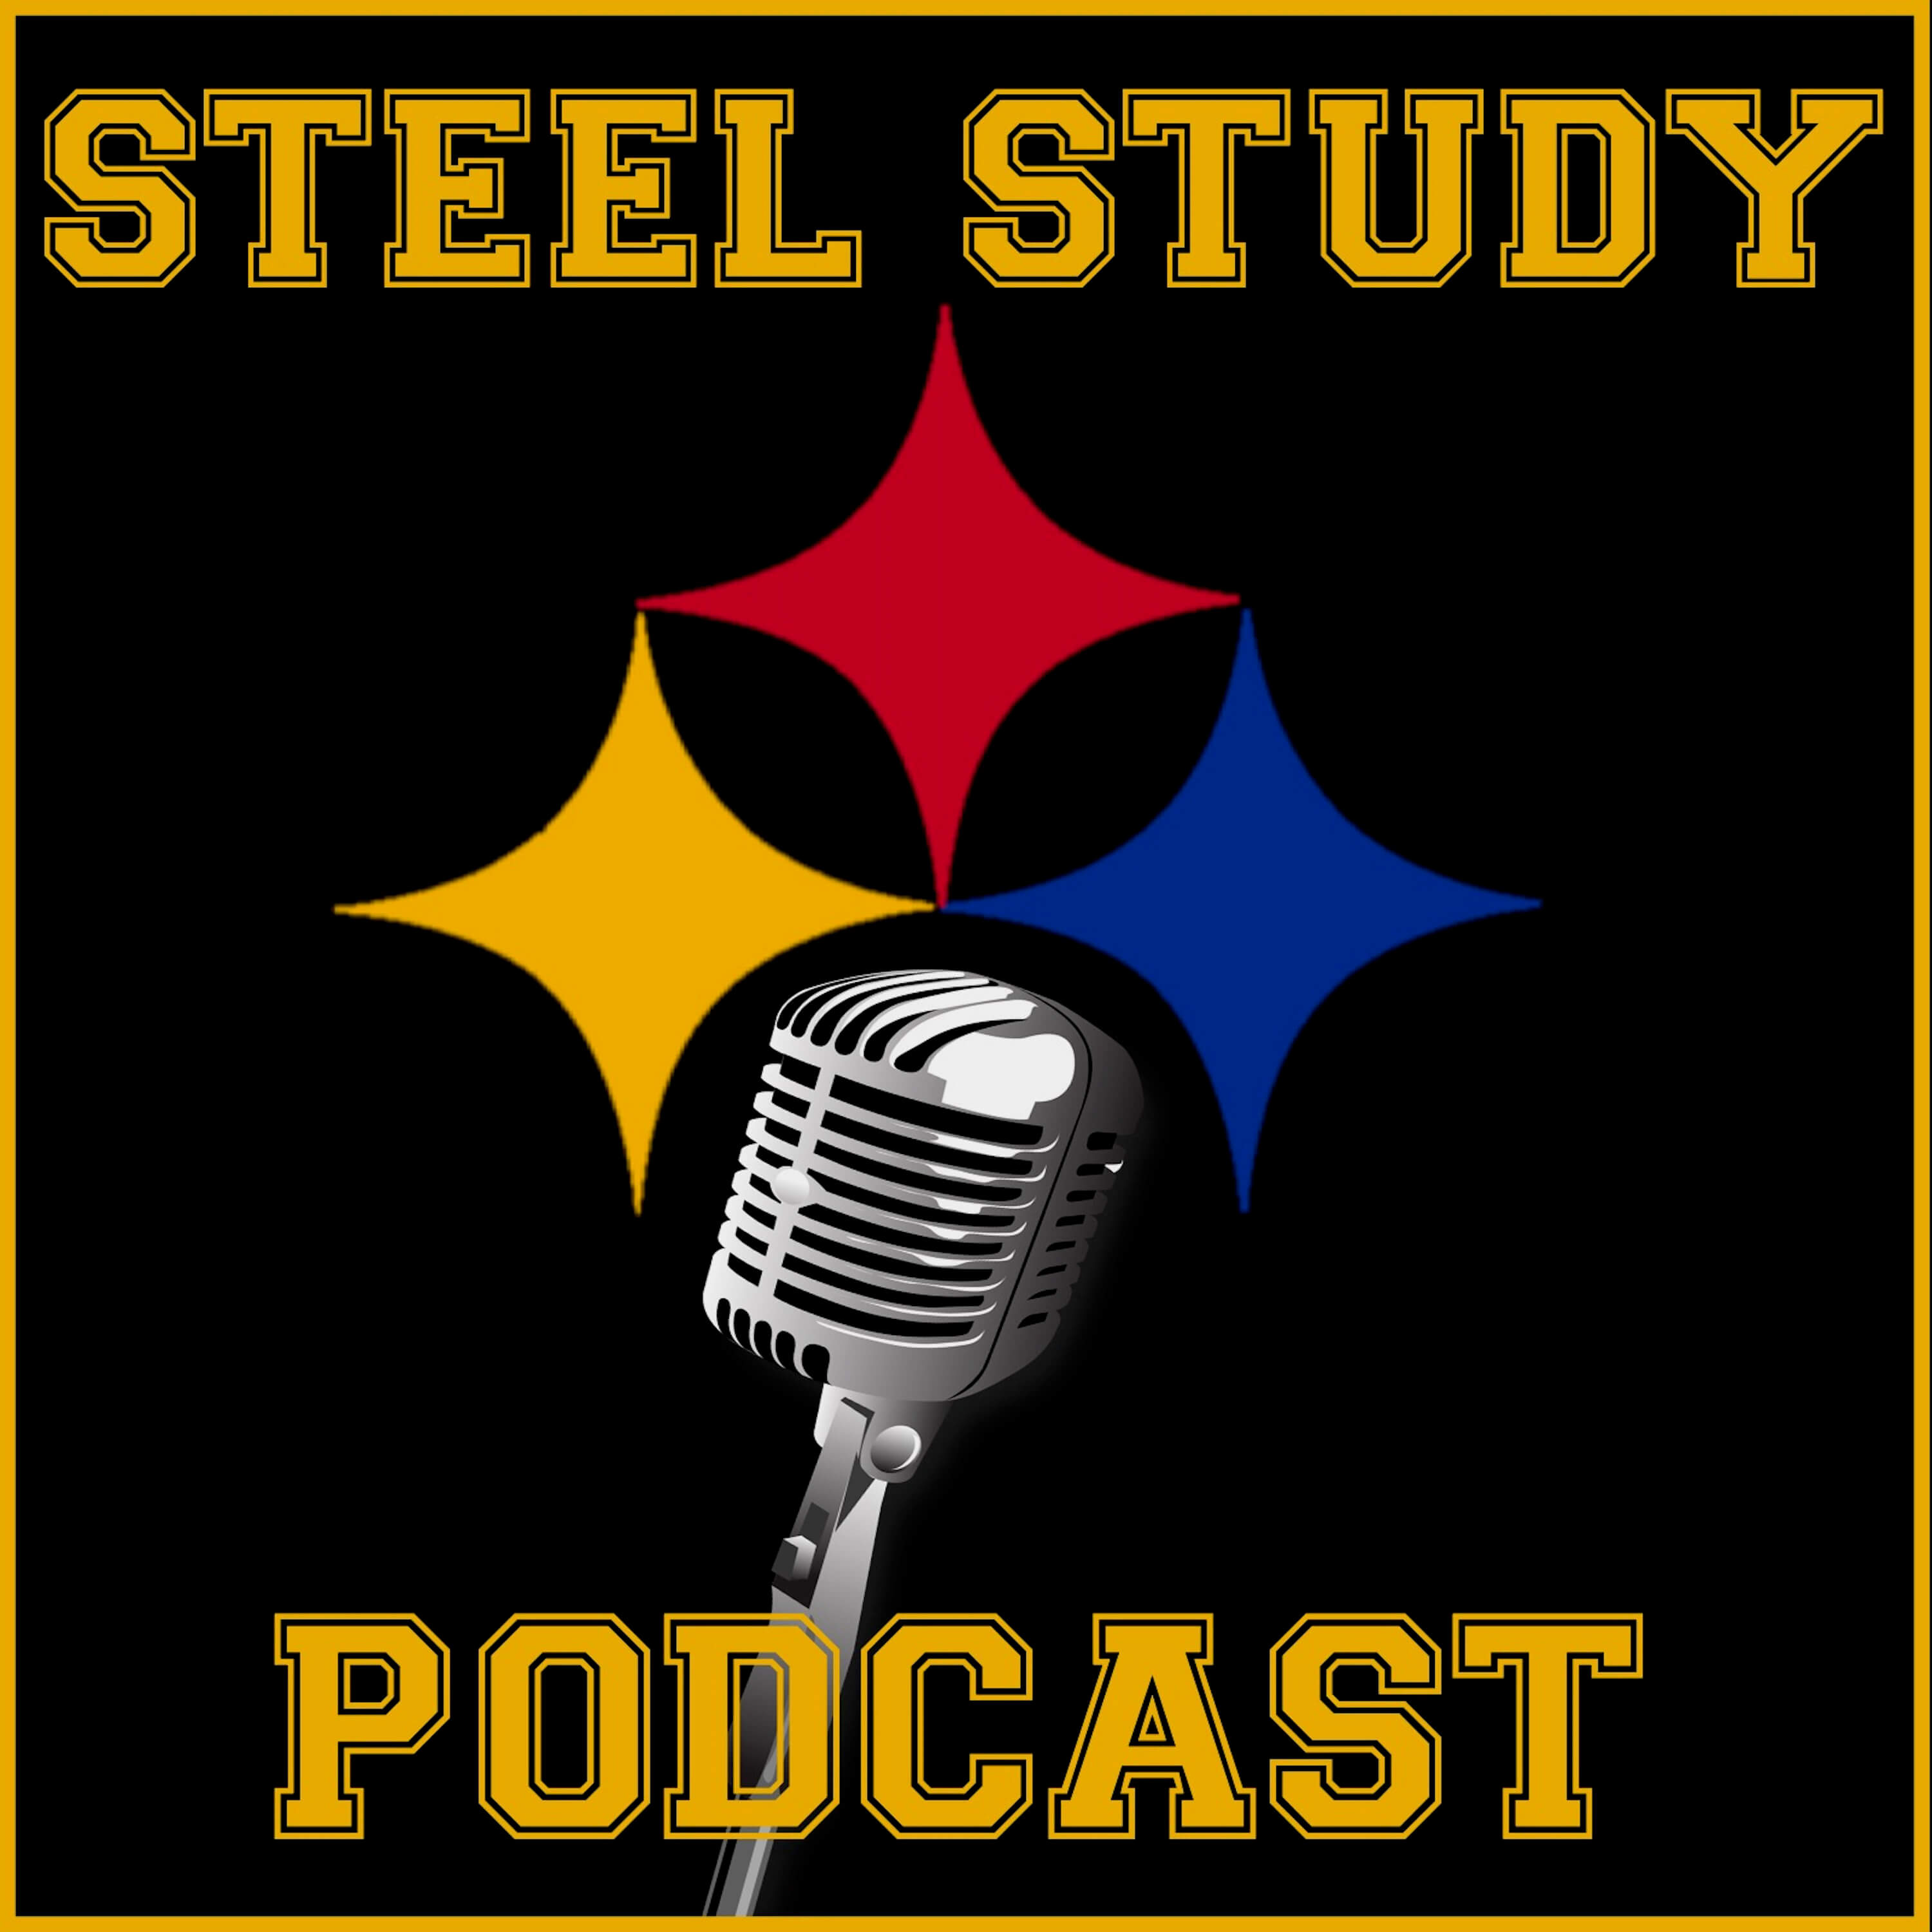 Artwork for podcast The Steel Study Podcast